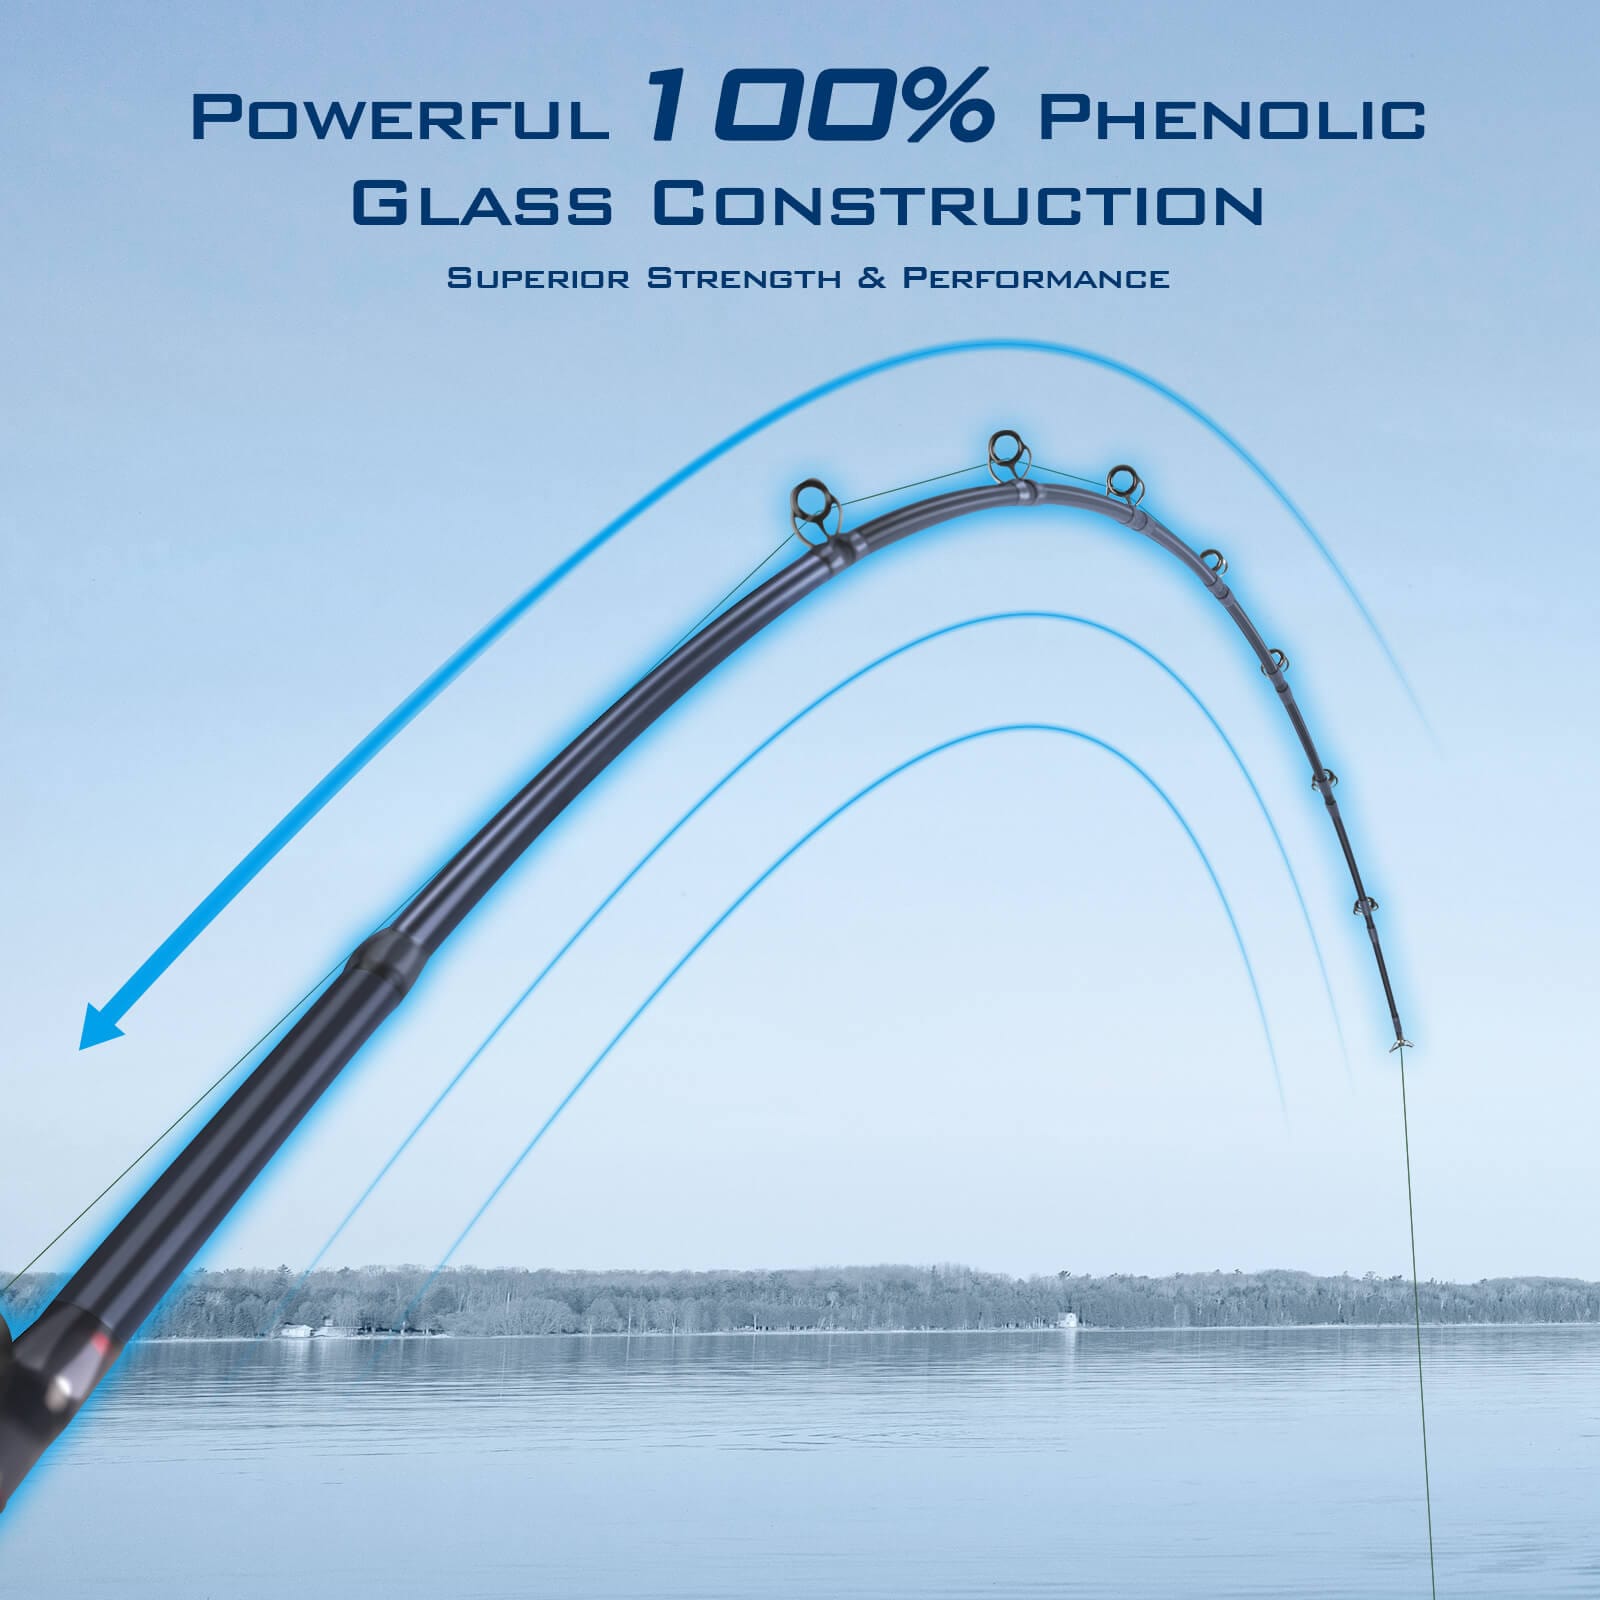 Our Chuck & Kratos composite rods are excellent all-around rods